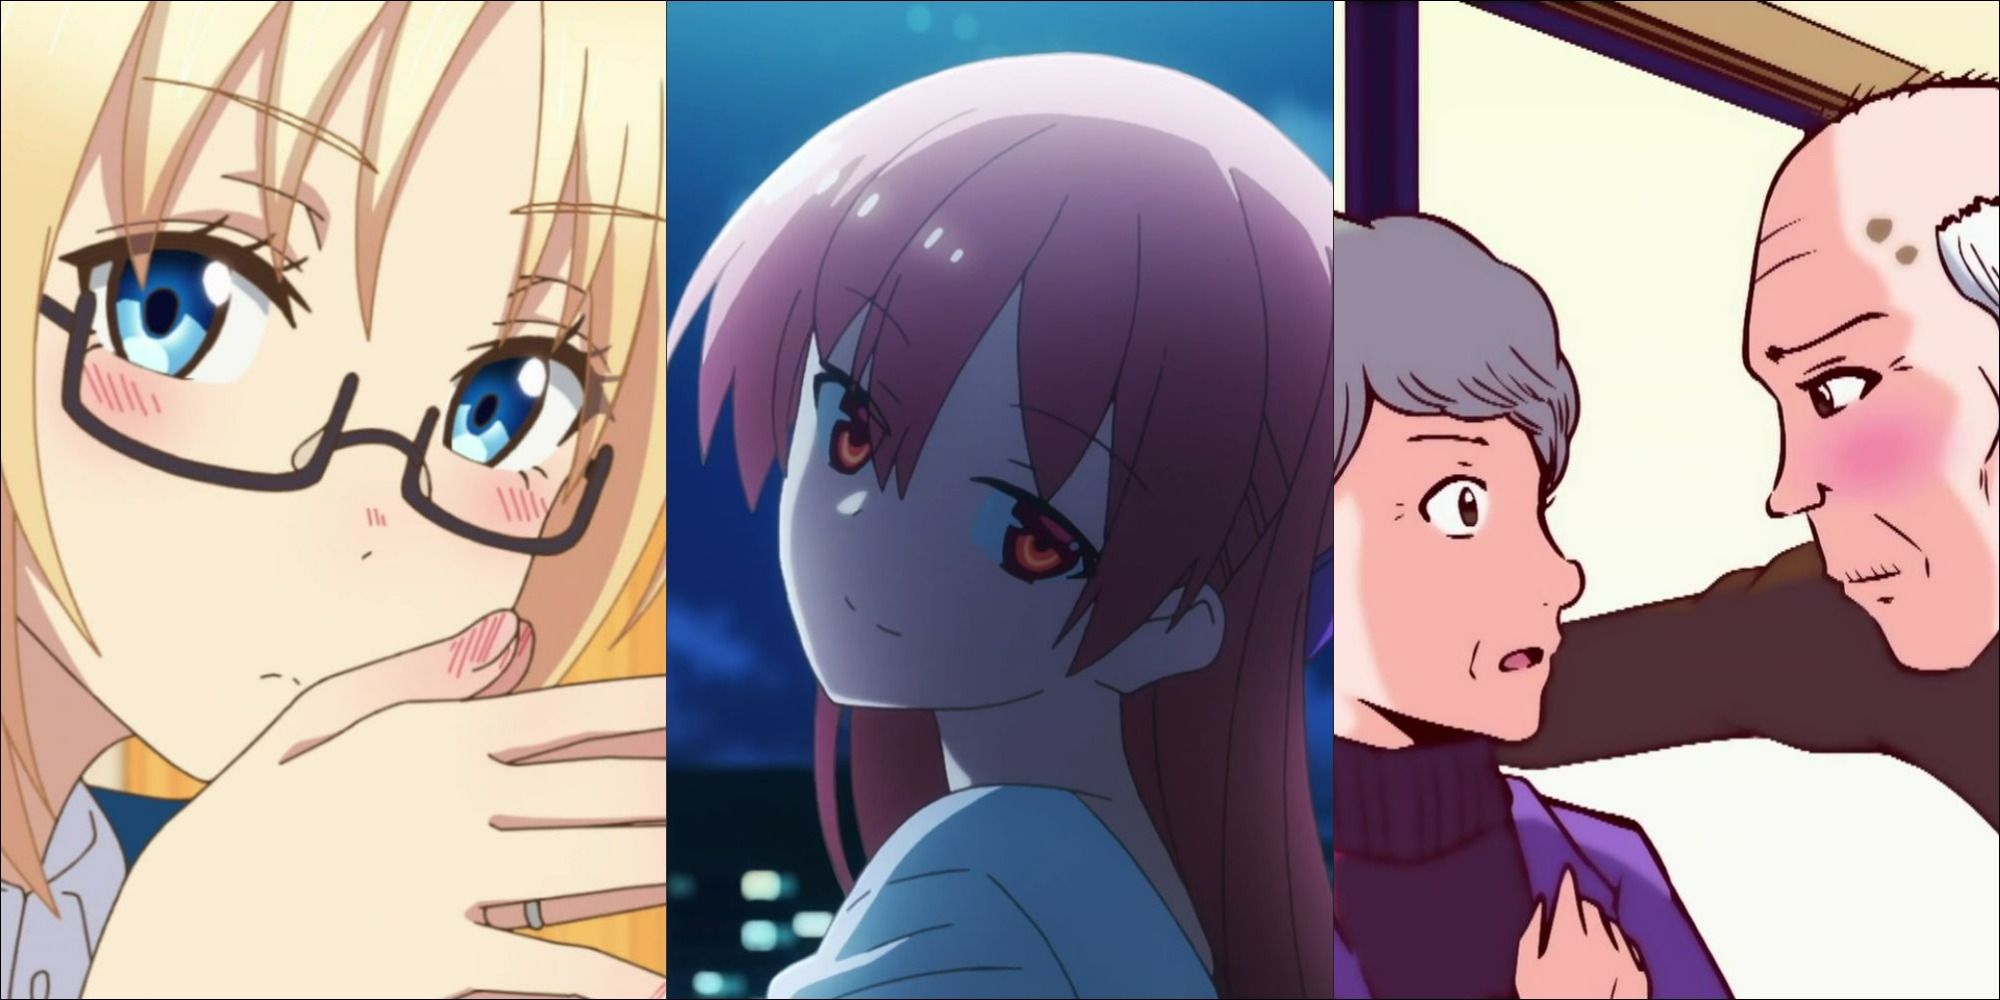 Four characters from three marriage romance anime